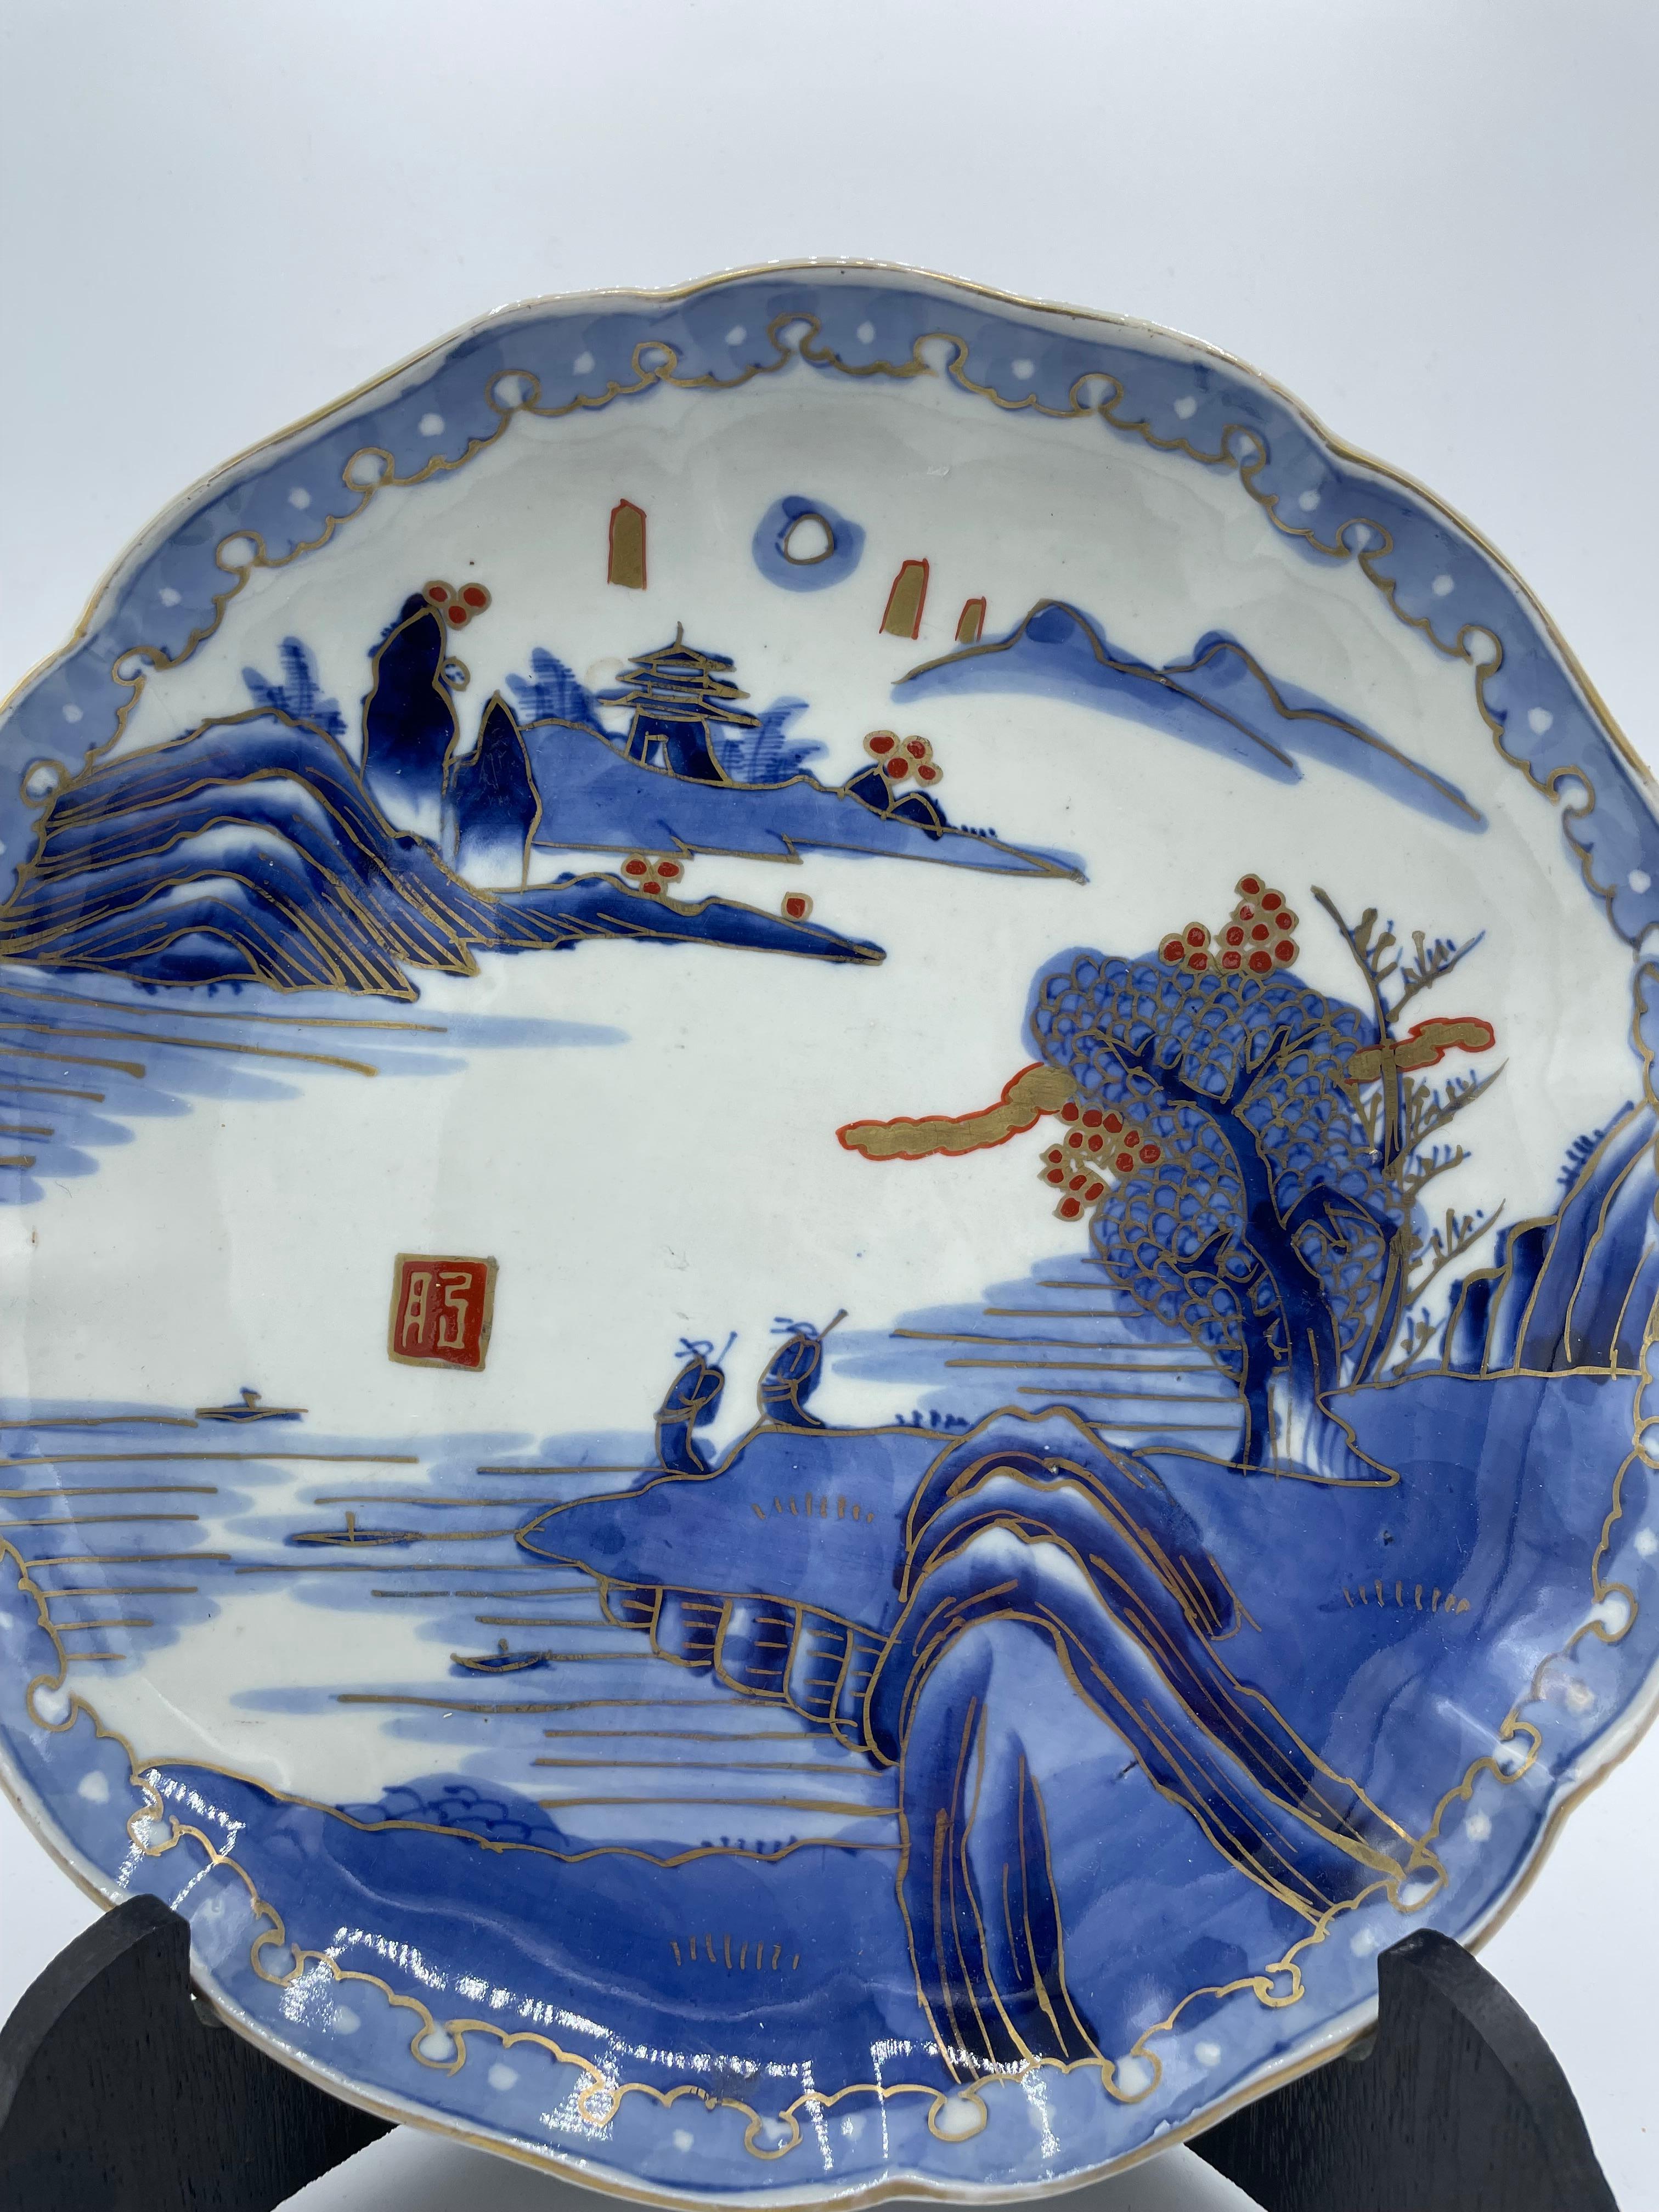 This is a plate which was made in Japan in Taisho era (around 1920s).
It was made with Imari yaki technnique.
This imari plate is made by Gekkyuu, there is a signature on the plate.

Imari ware is a Western term for a brightly-coloured style of